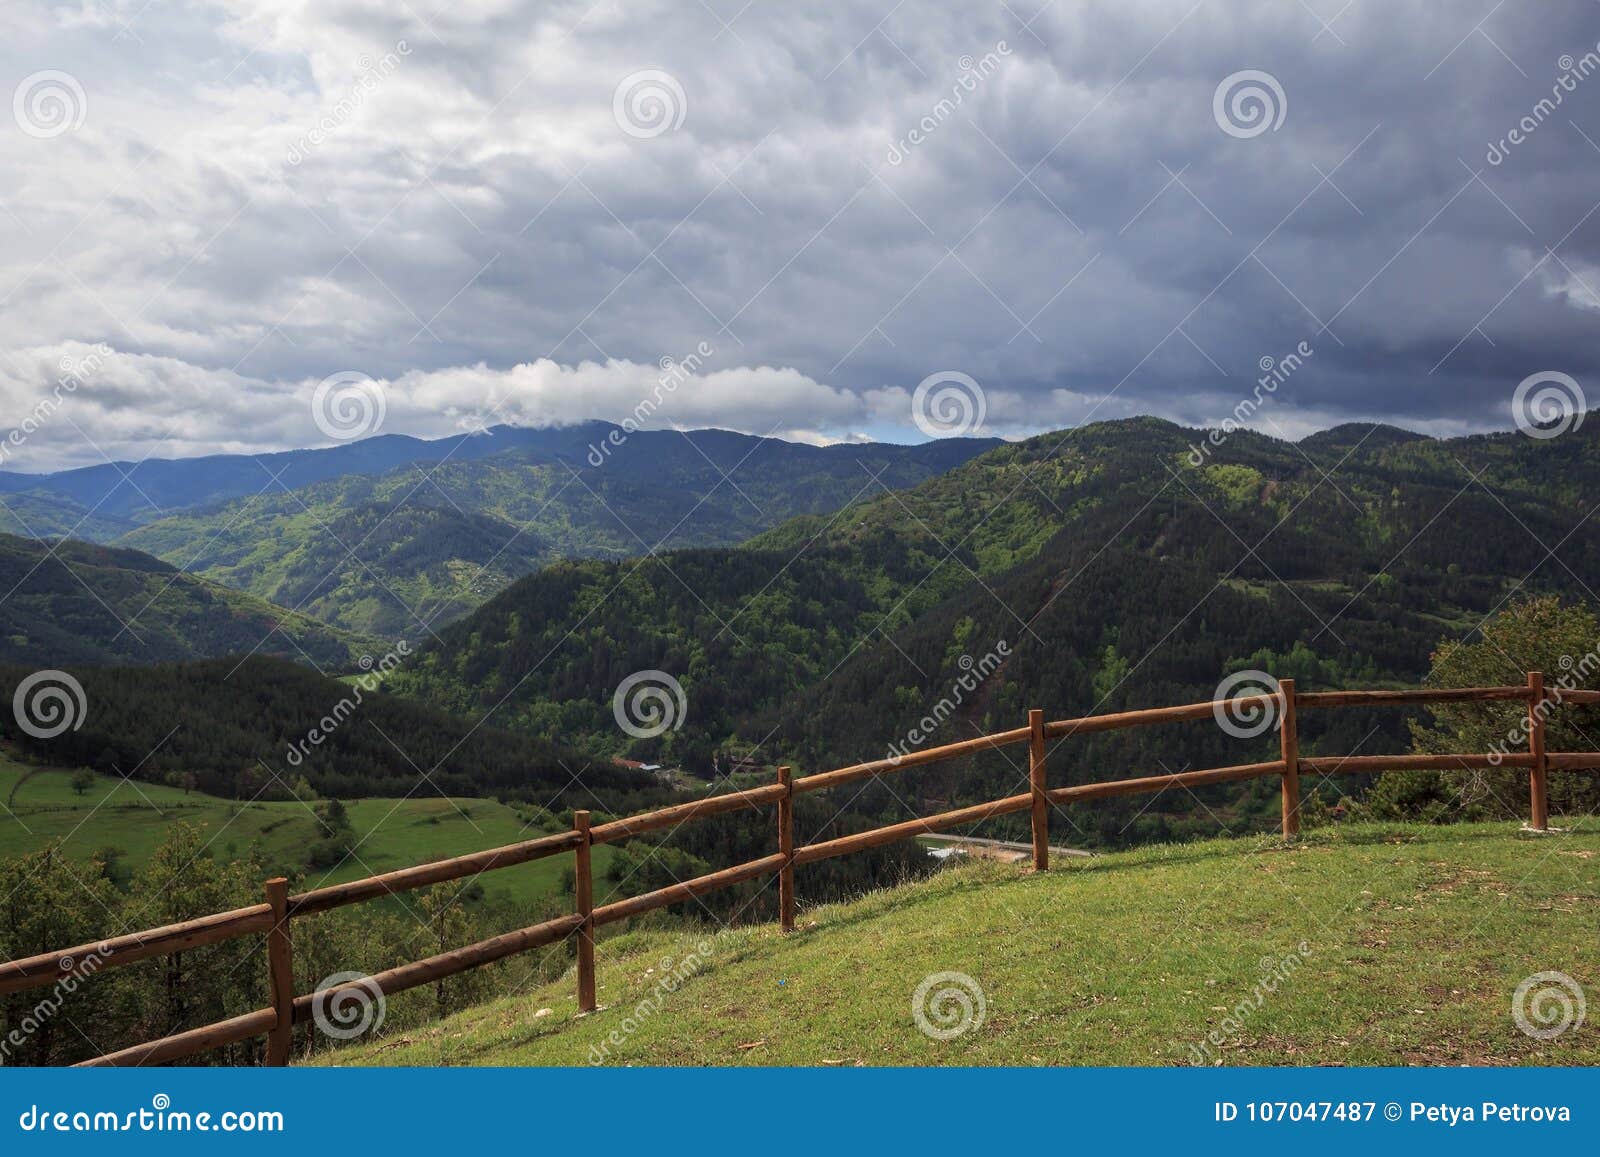 Amazing View Of Rhodope Mountains In Bulgaria Stock Image ...